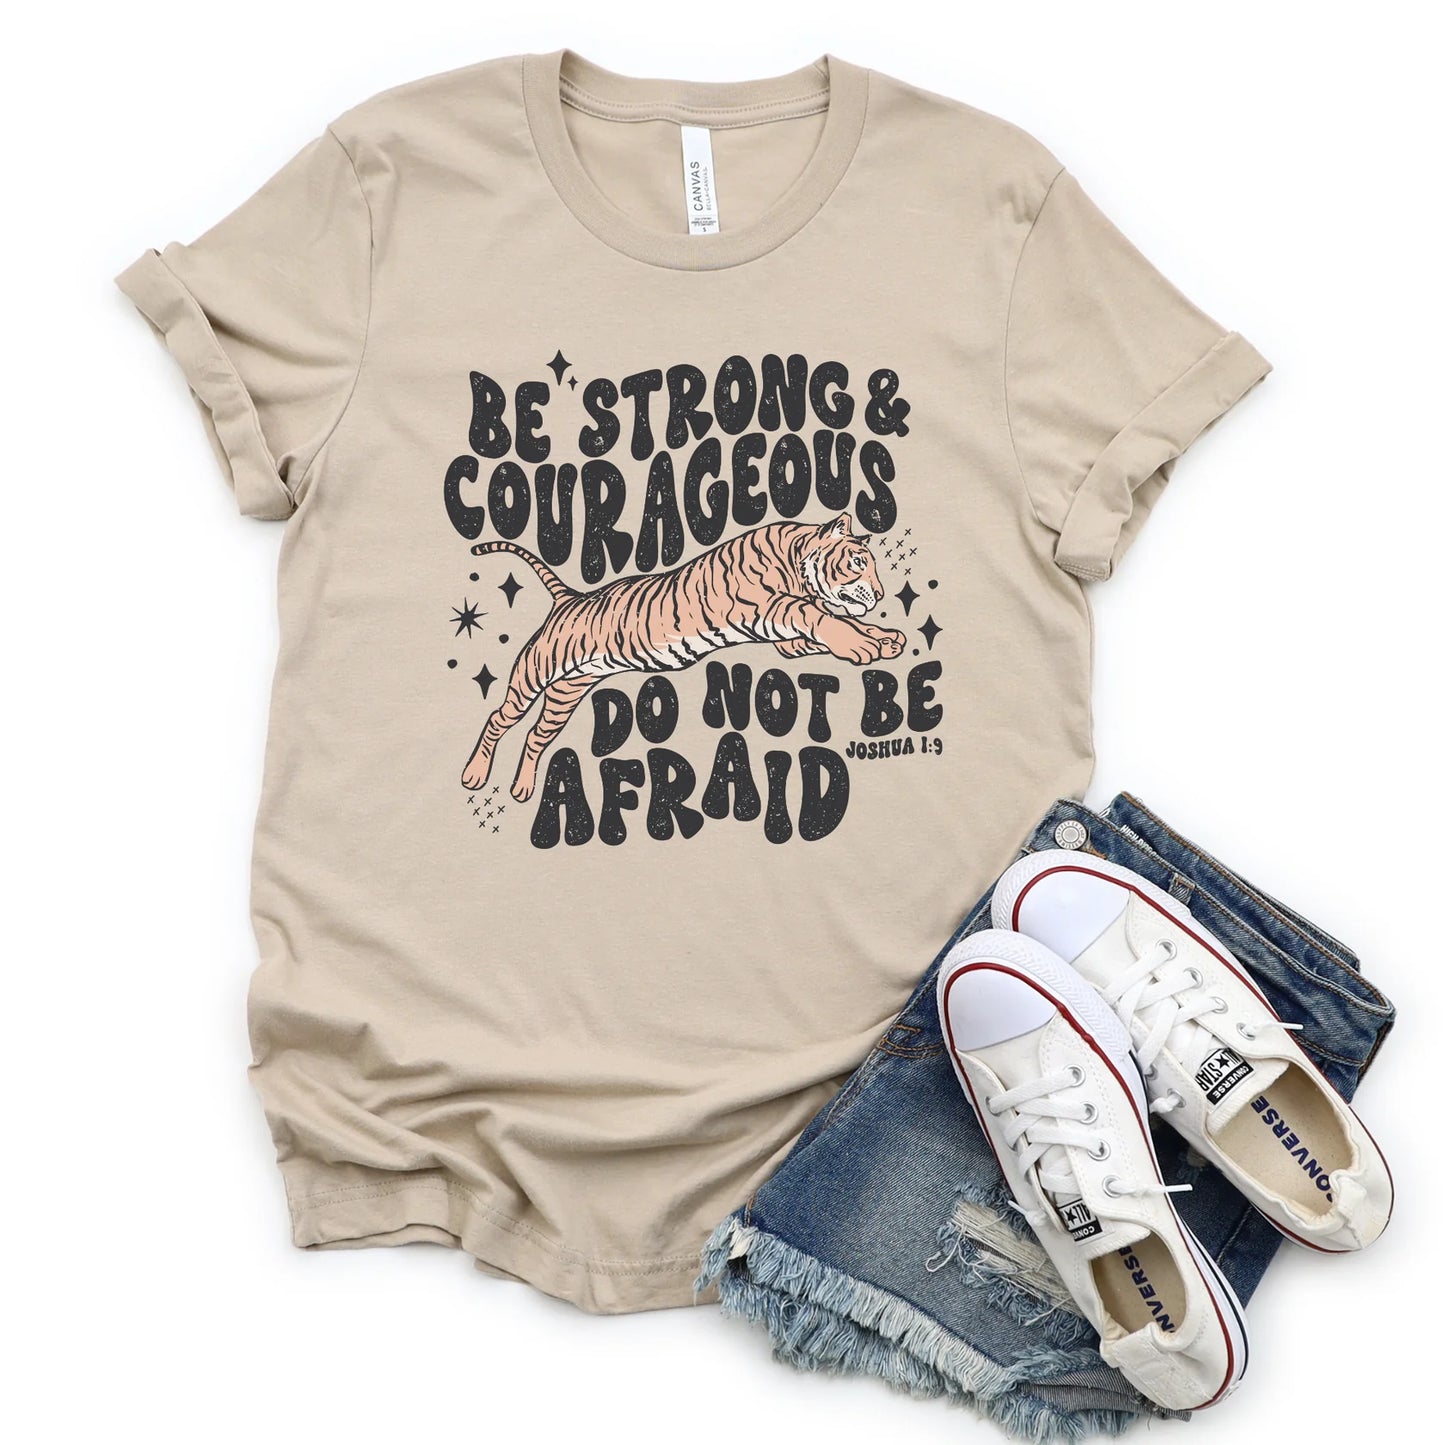 Be Strong and Courageous Do Not Be Afraid Graphic Tee or Sweatshirt